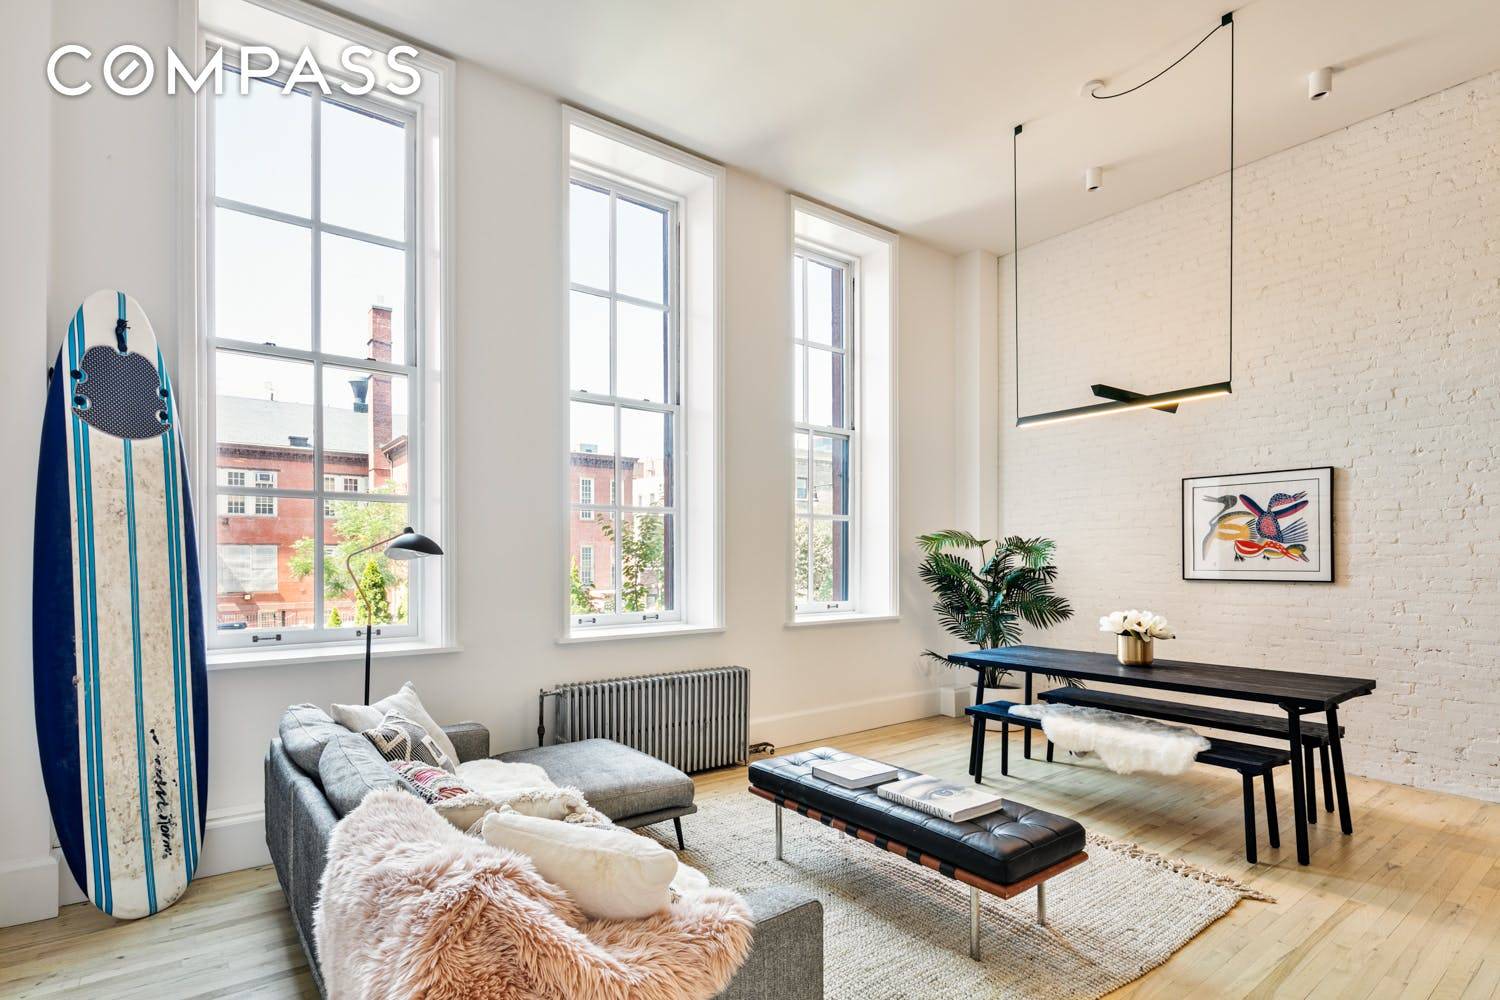 Let there be light ! 279 Sterling Place 1C strikes an exquisite balance between old and new a clean, modern loft in a landmark converted schoolhouse.